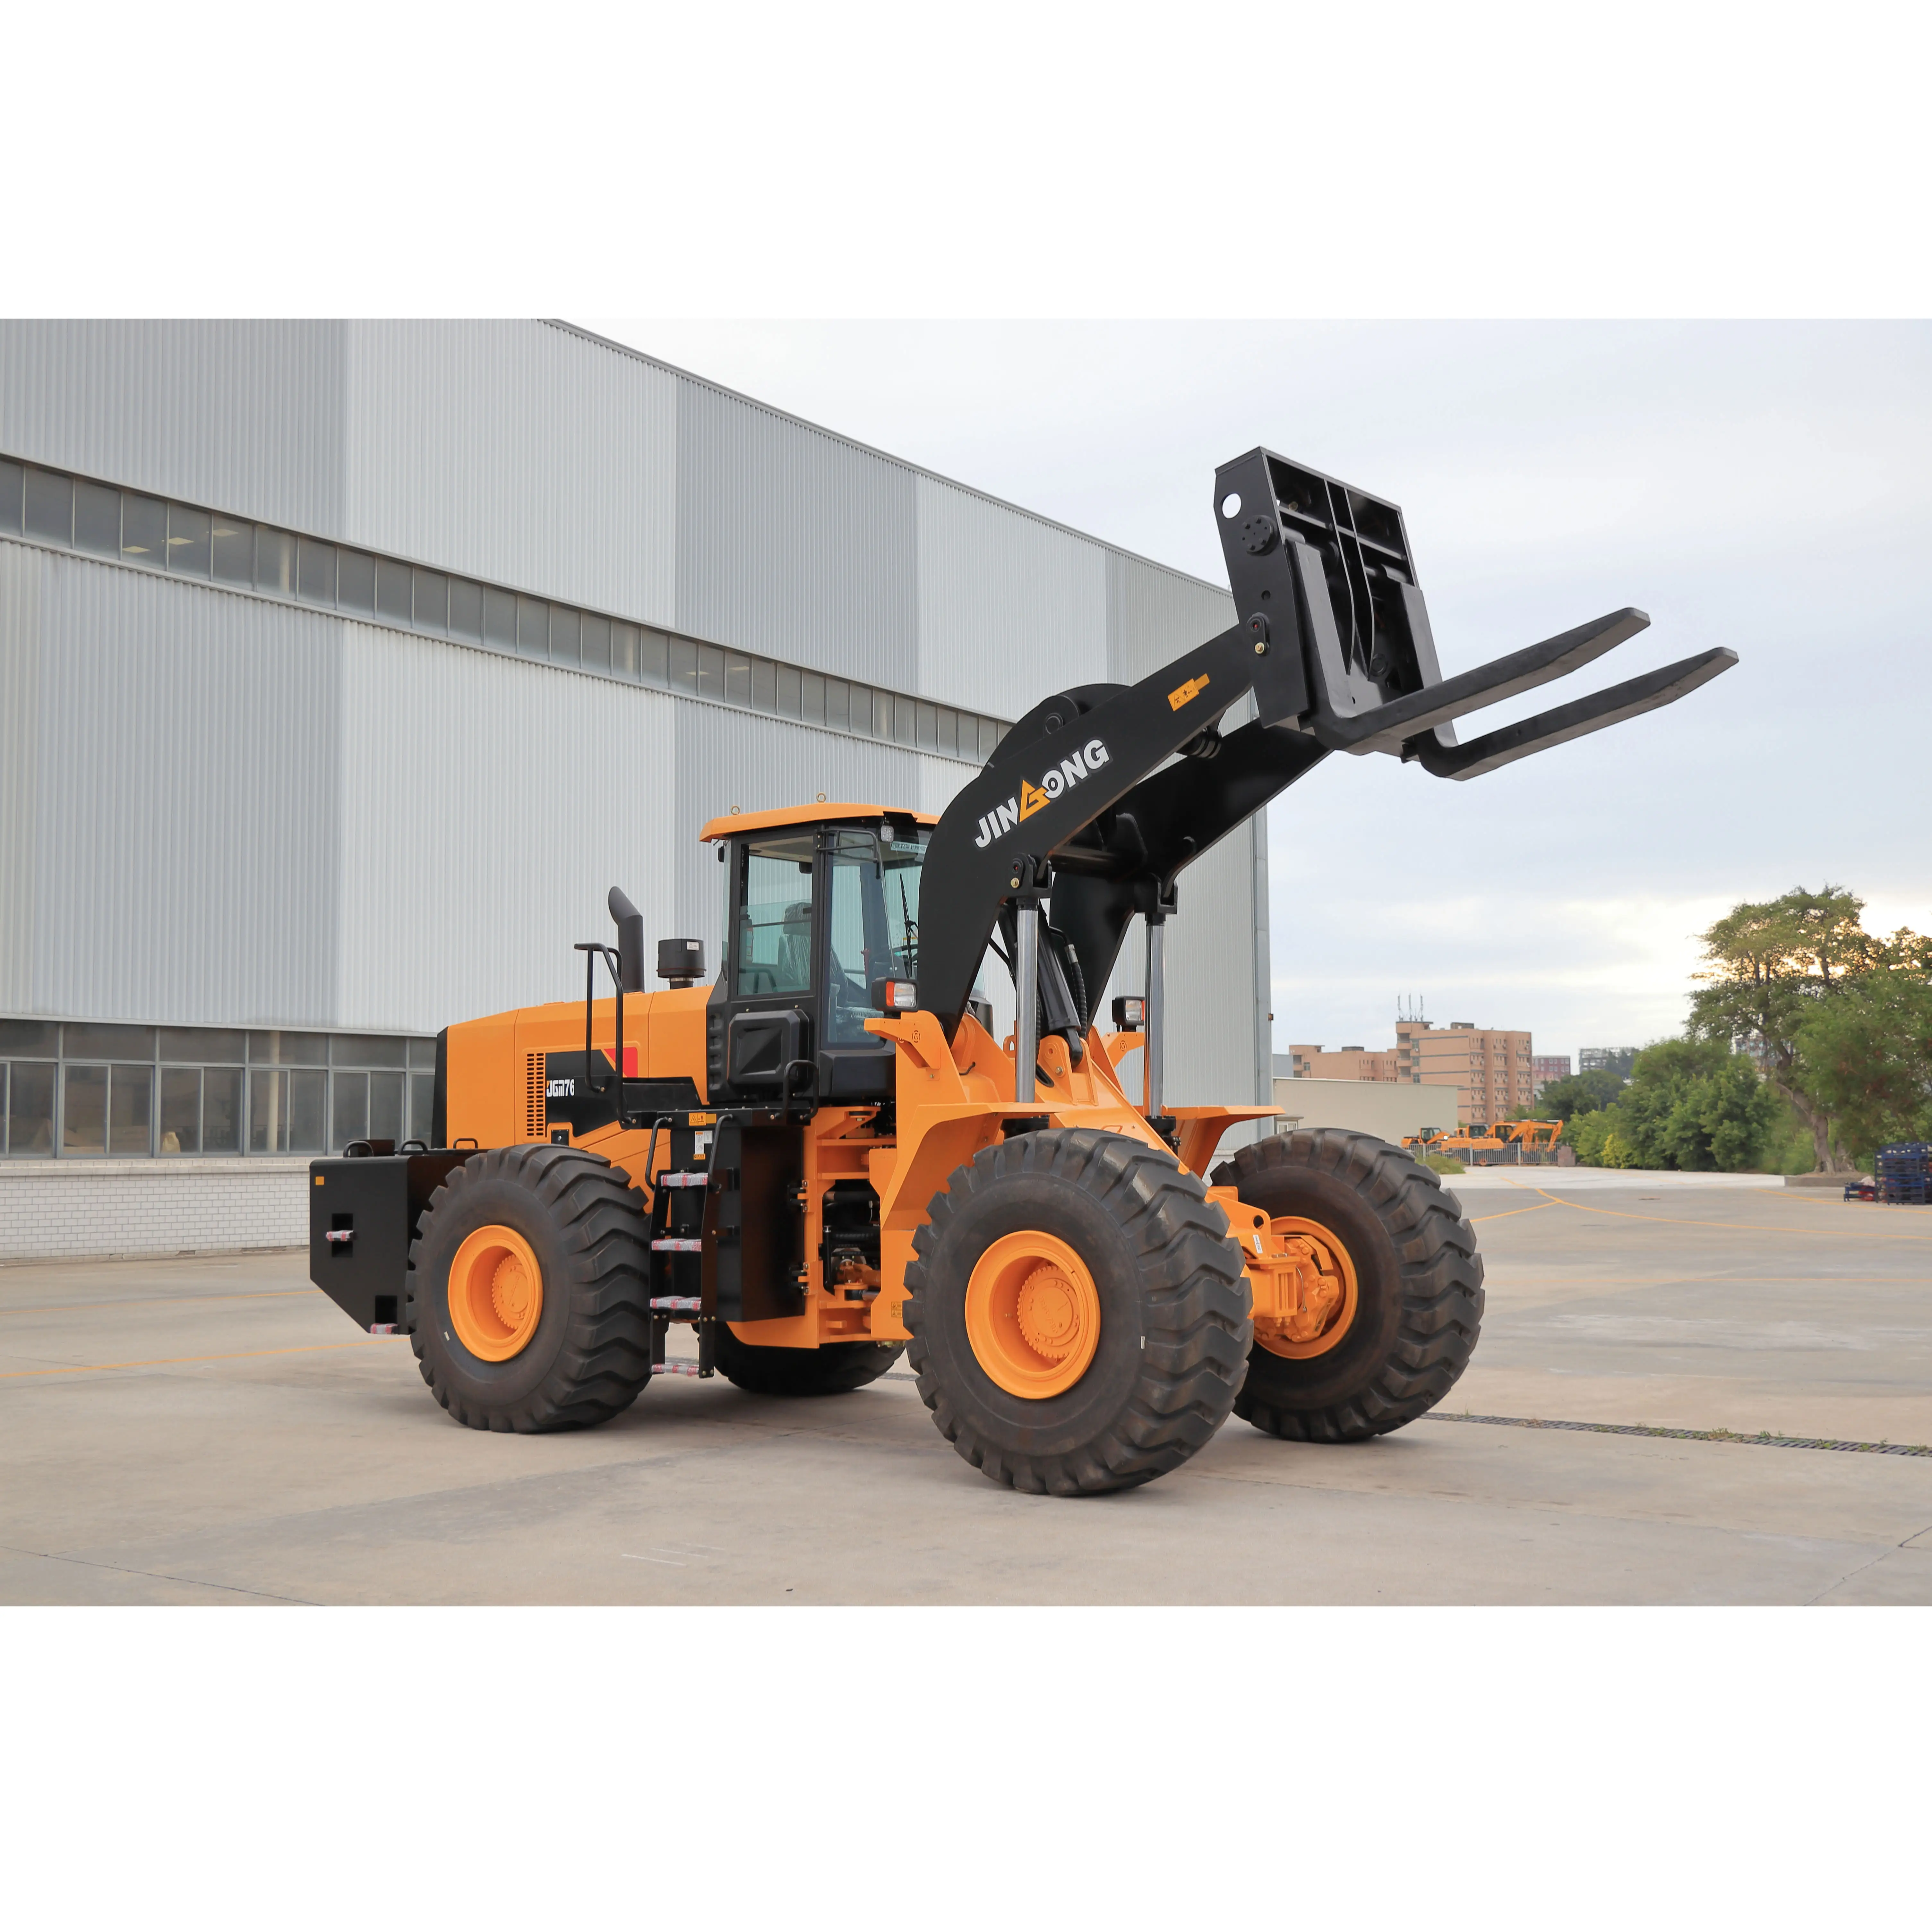 Stone and Block Handing Wheel Loader For Quarry and Hot Sale Now